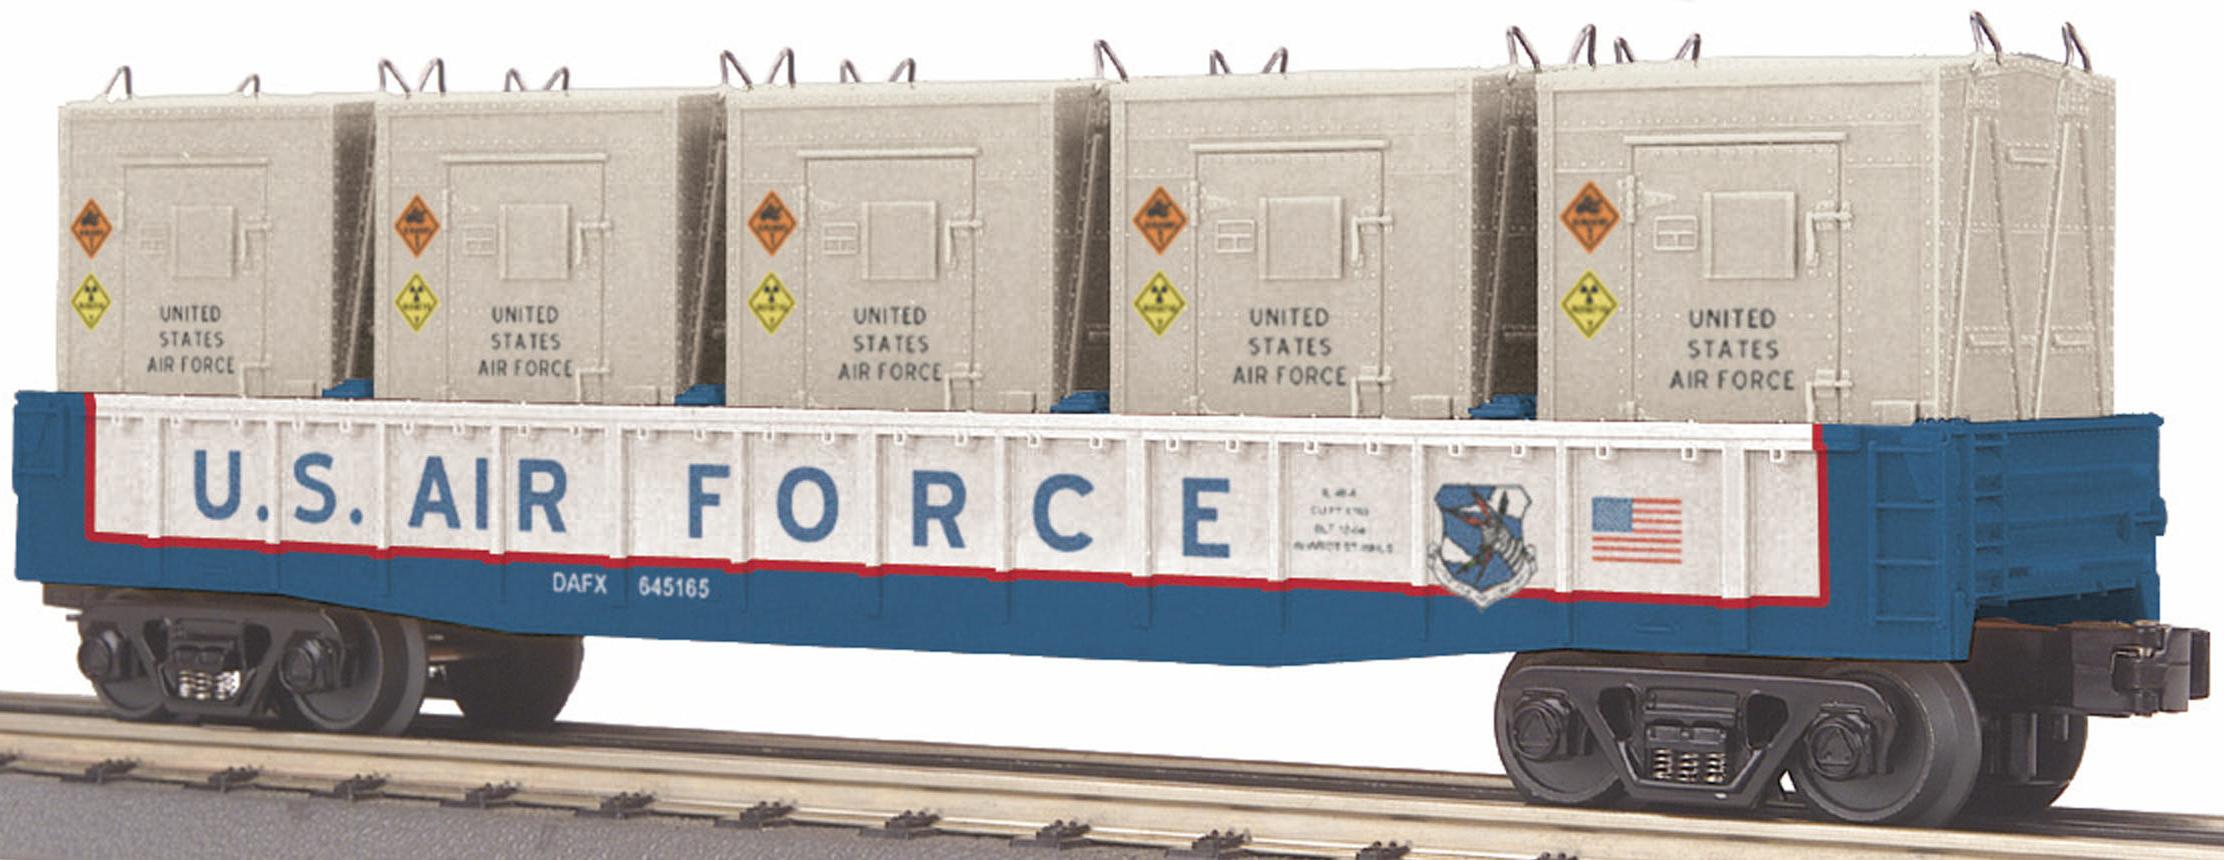 U.S. Air Force Gondola w/5 LCL Containers image